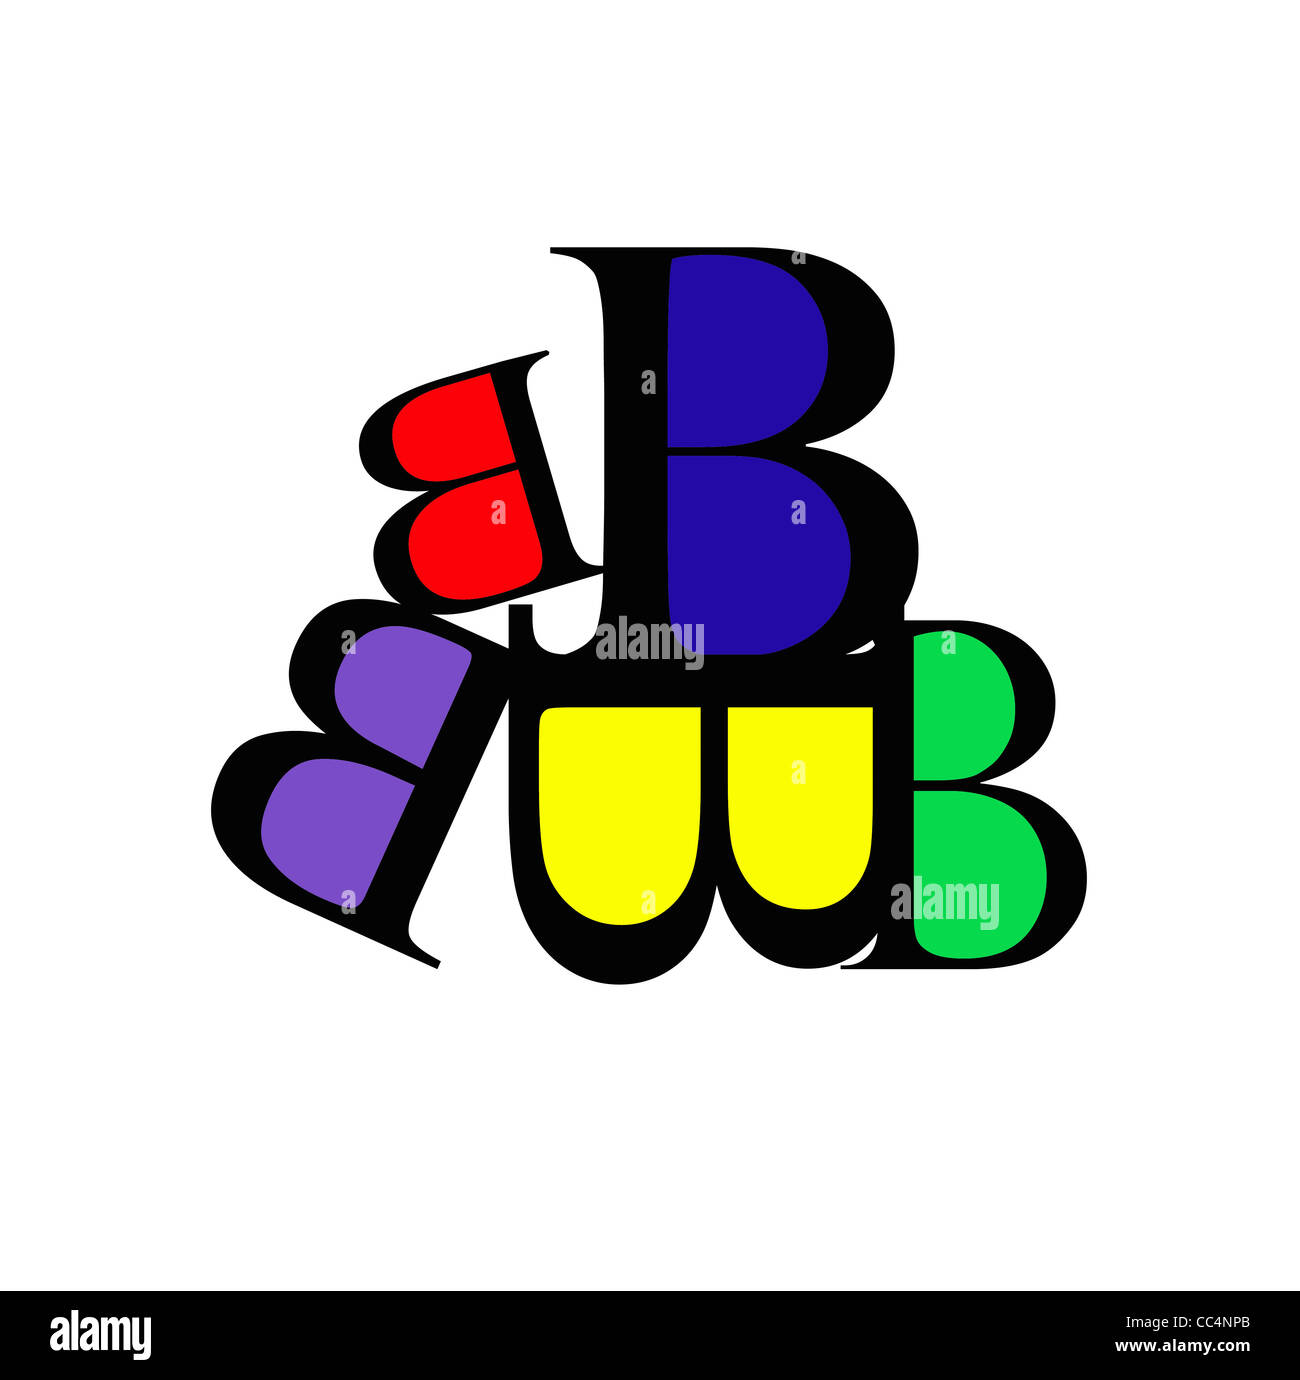 design of serif letter B's filled in with different colors Stock Photo